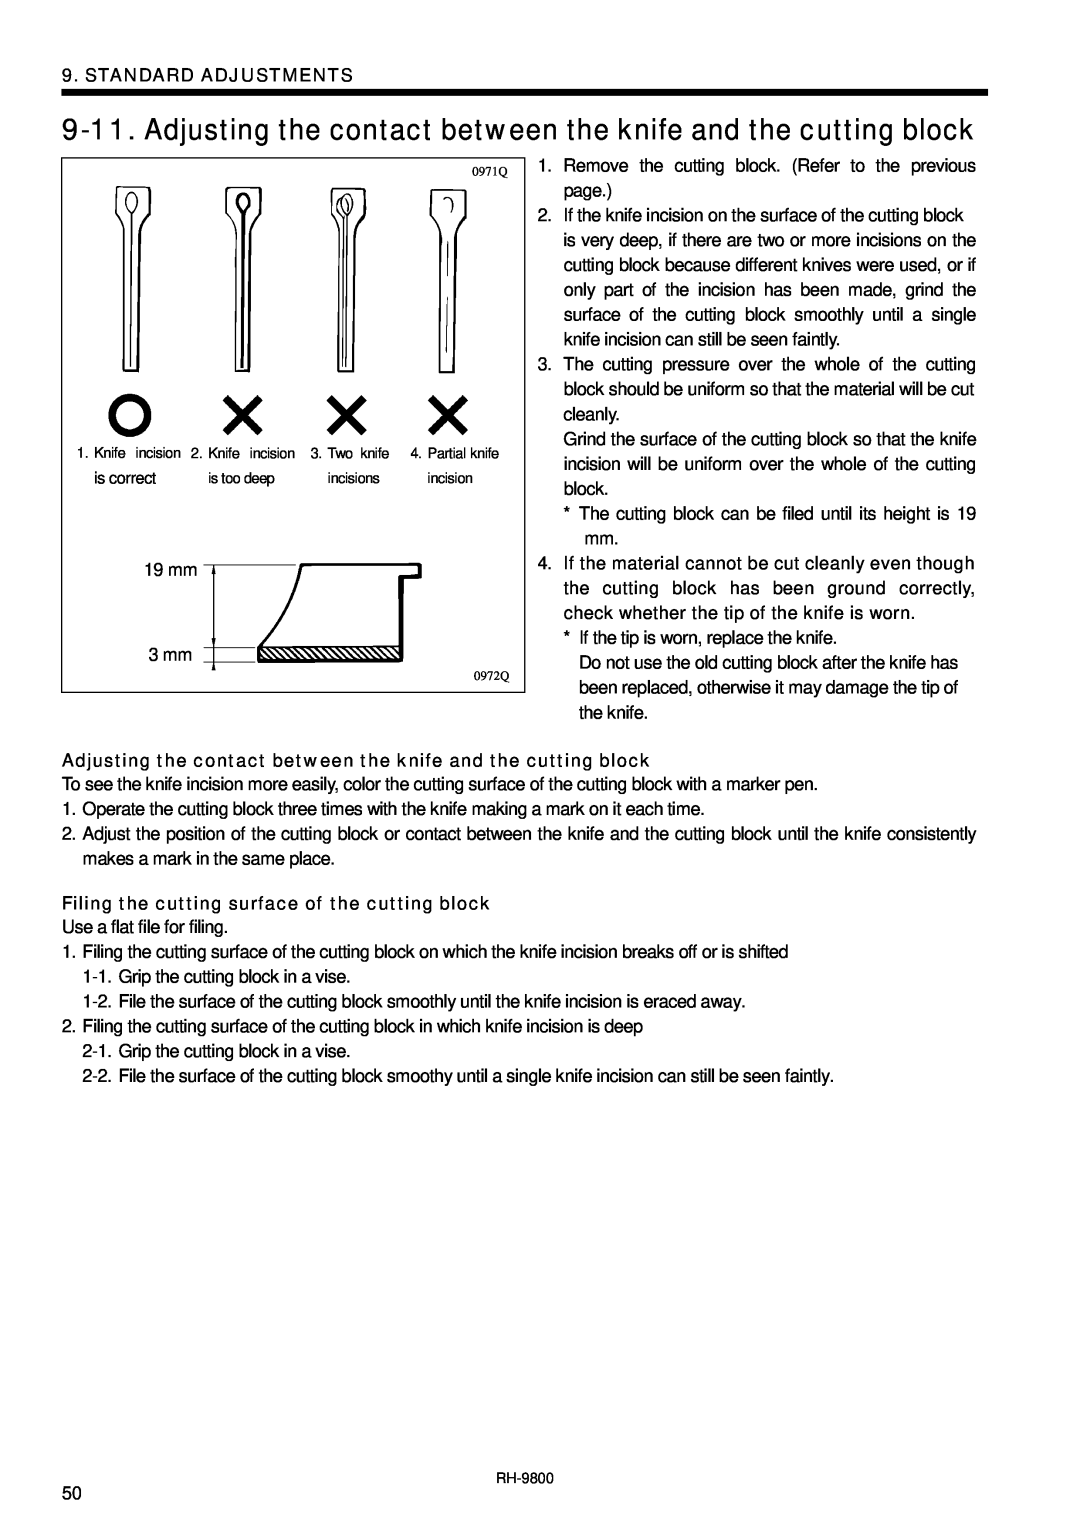 Brother DH4-B980 instruction manual Adjusting the contact between the knife and the cutting block, Standard Adjustments 